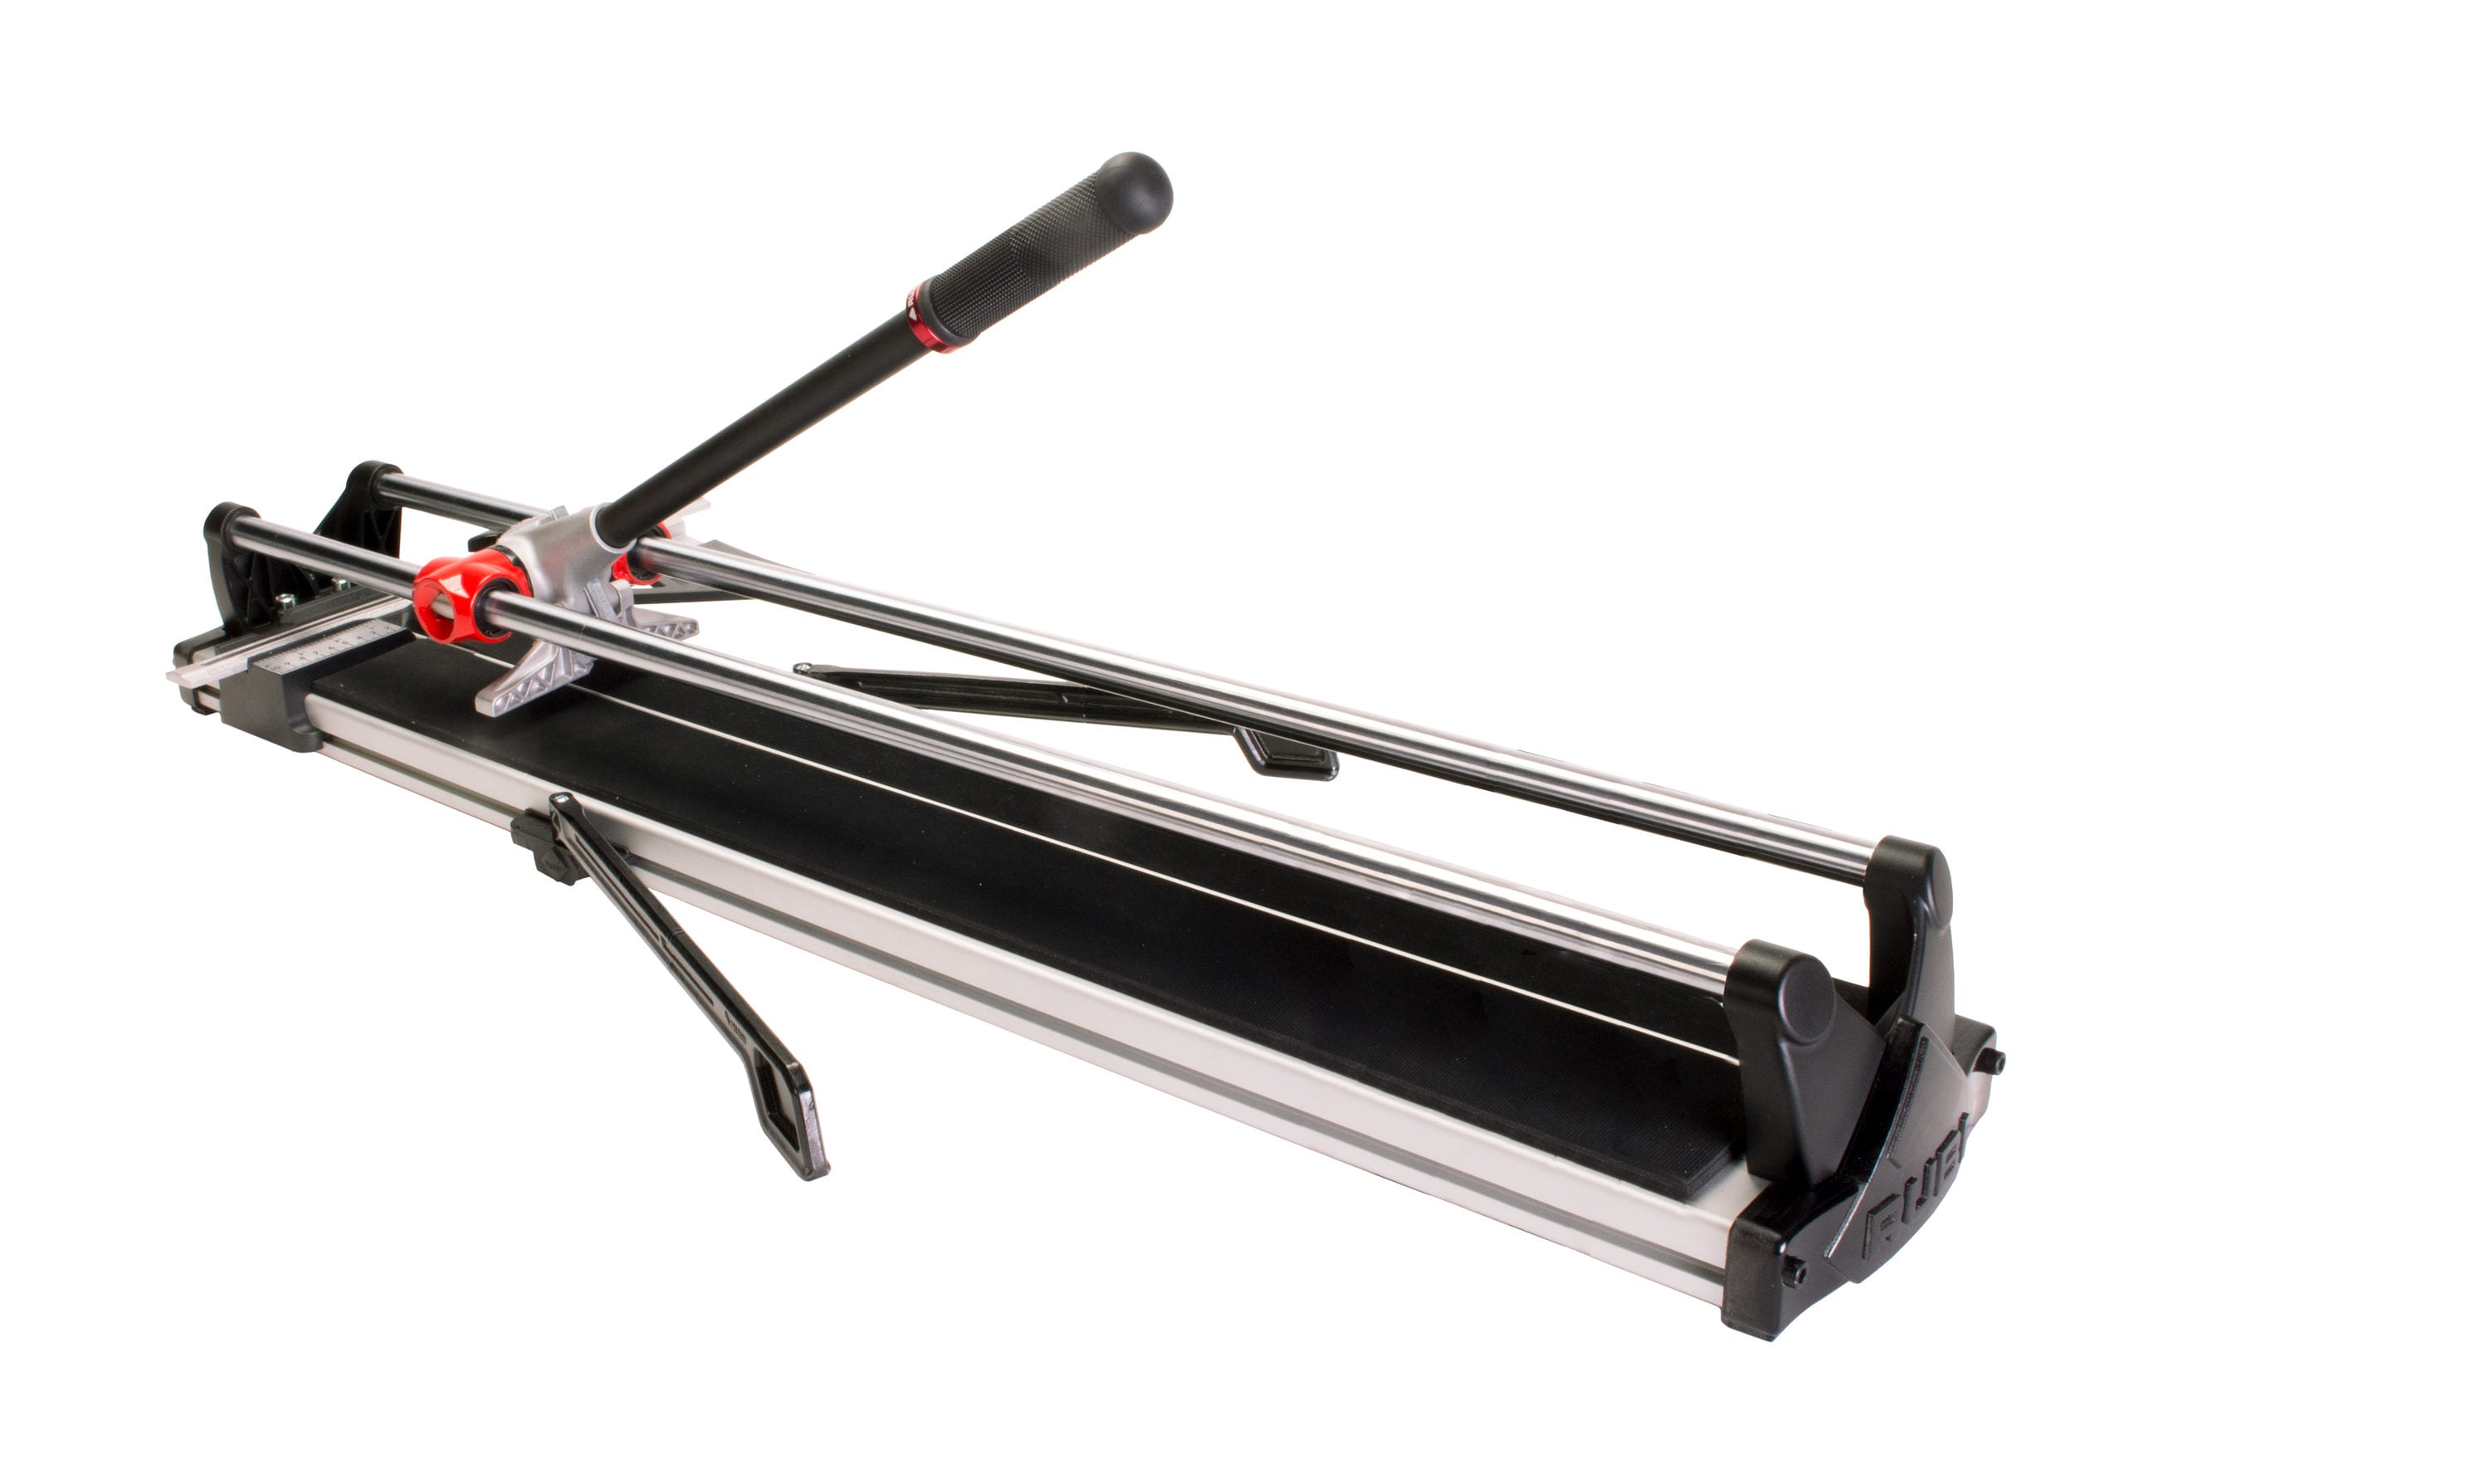 Rubi Tools 36 in. Speed Magnet Tile Cutter 14990 from Rubi Tools - Acme  Tools